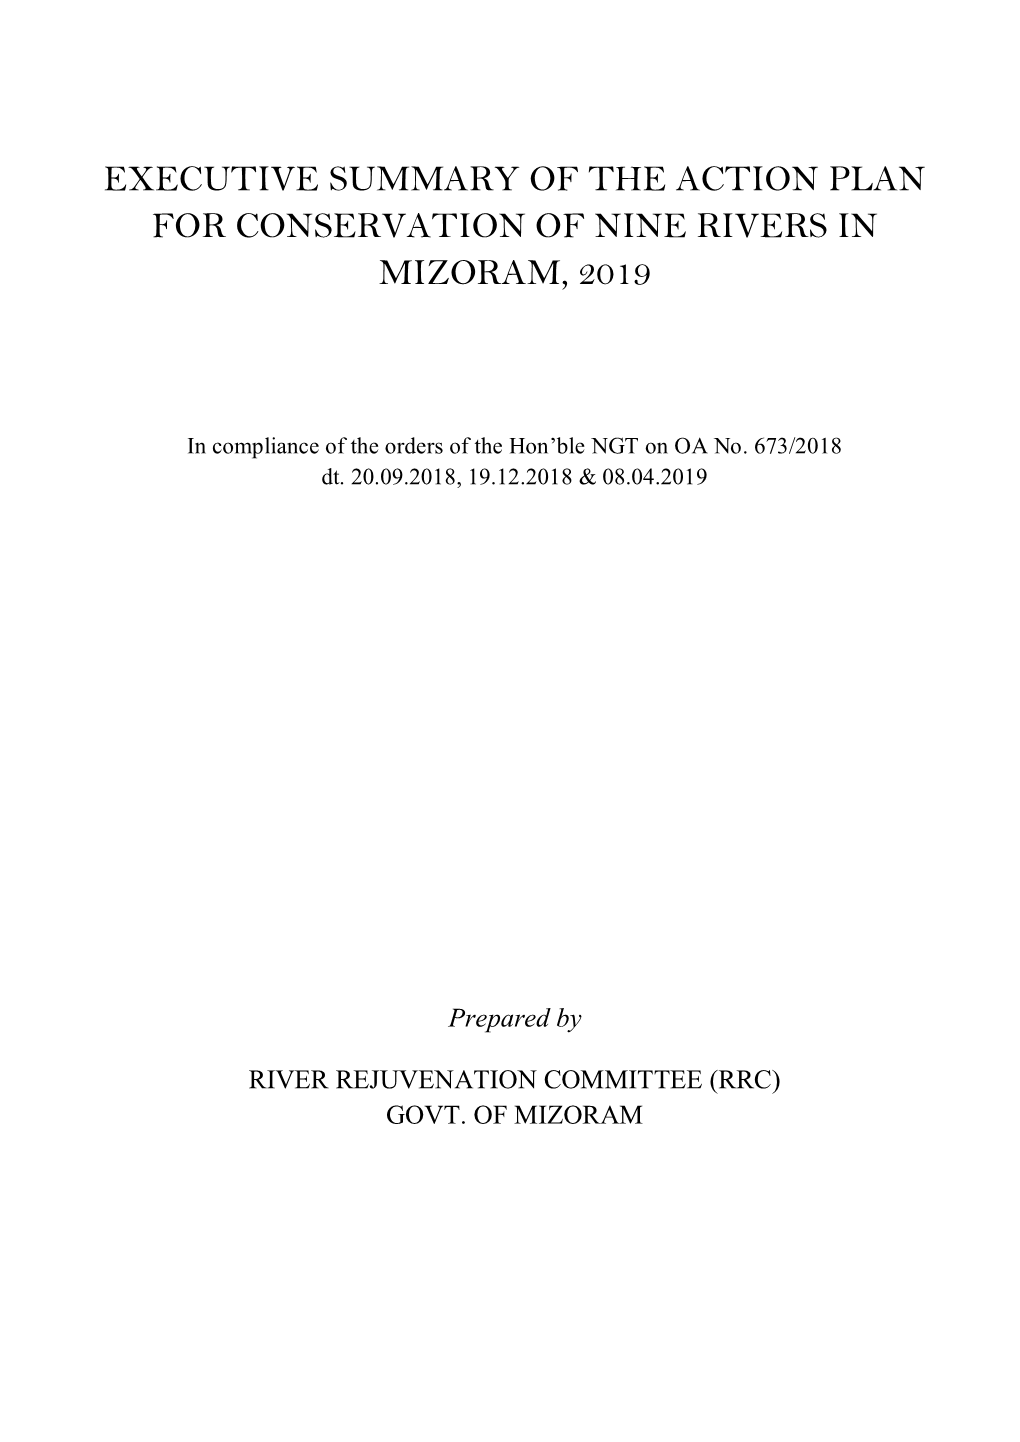 2. Executive Summary of Revised Action Plan for 9 Rivers in Mizoram